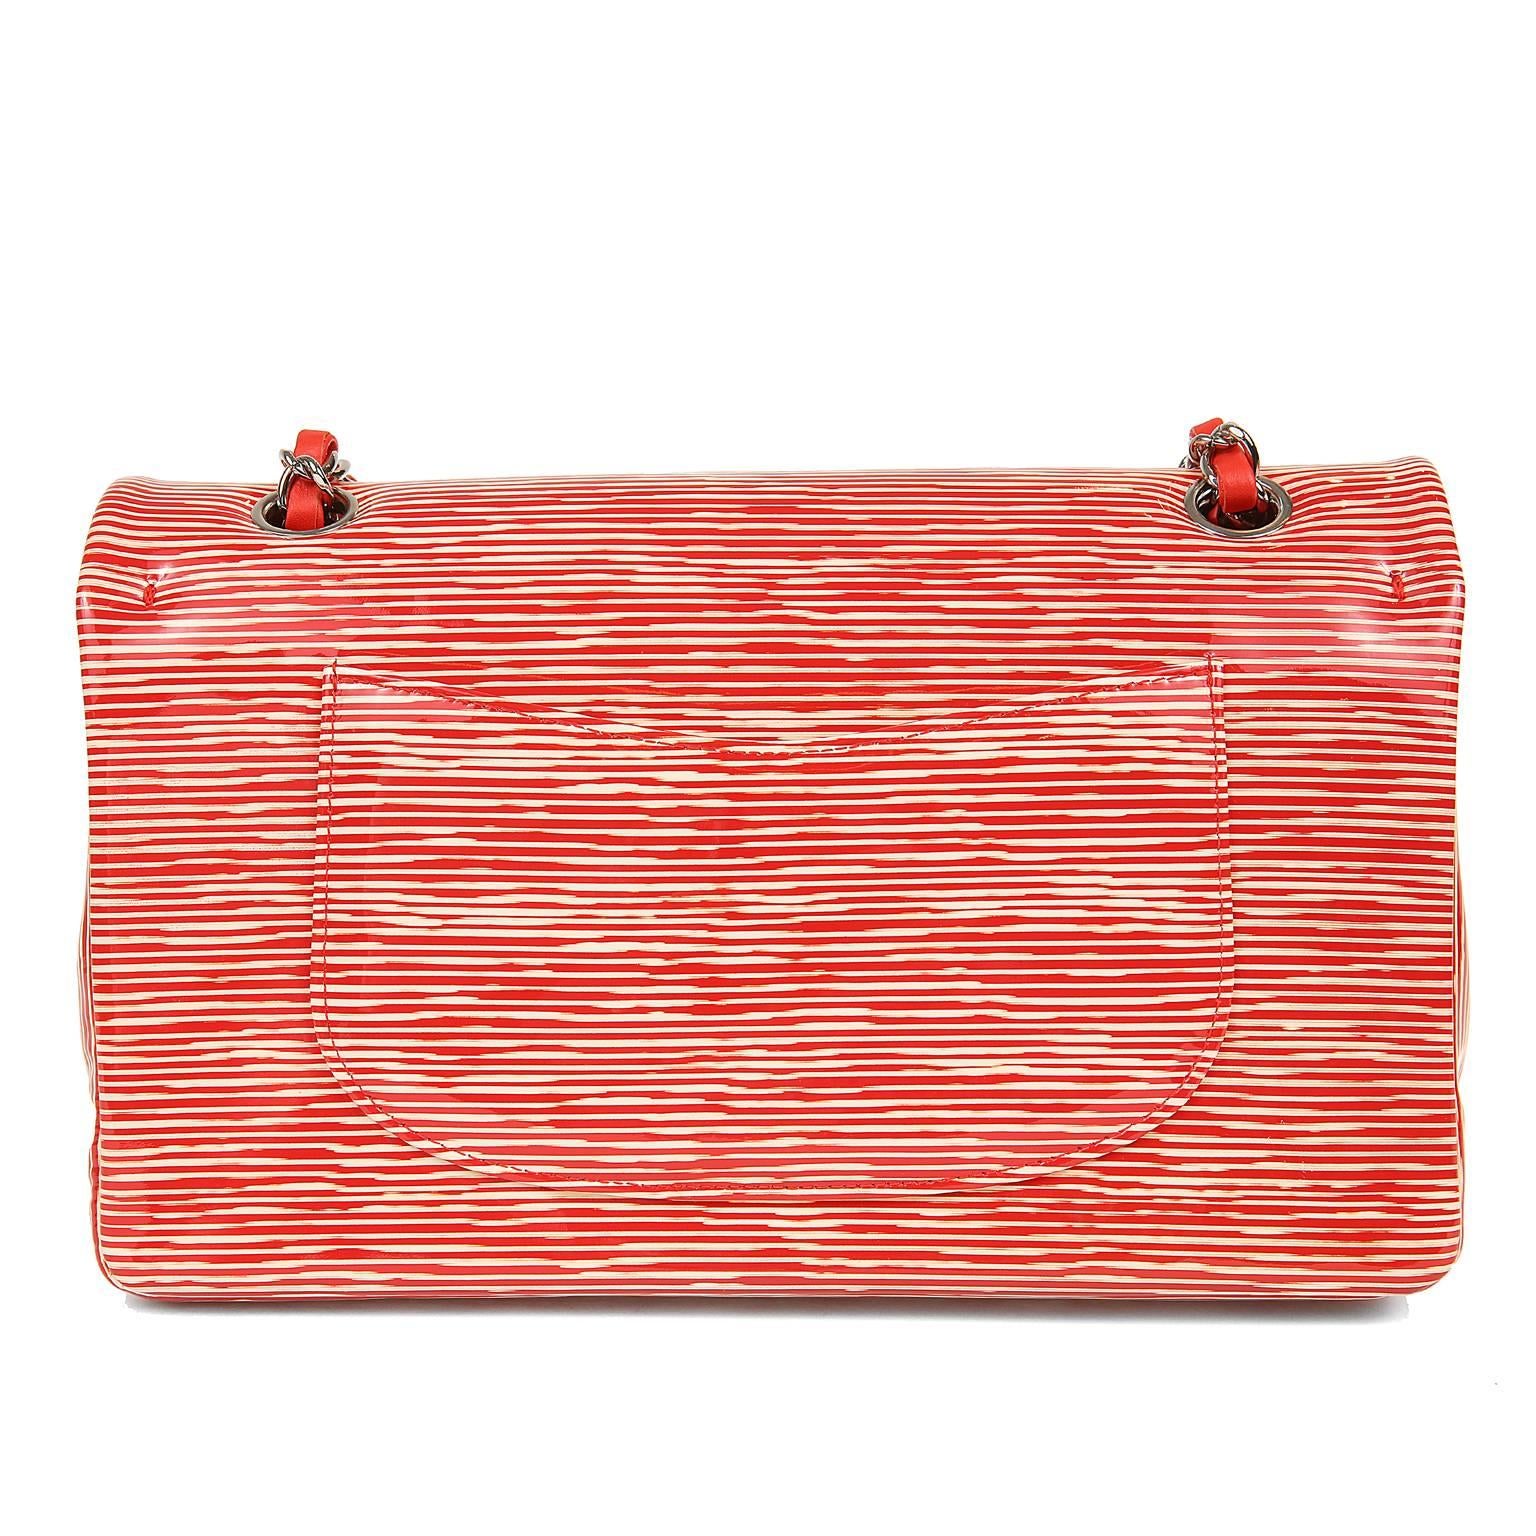 Chanel Red and Cream Striped Patent Leather Classic Flap- PRISTINE carried. 

Medium Double Flap Classic in cherry red patent leather with ivory stripes.    Silver interlocking CC twist lock secures the exterior flap.  Bright red leather interior